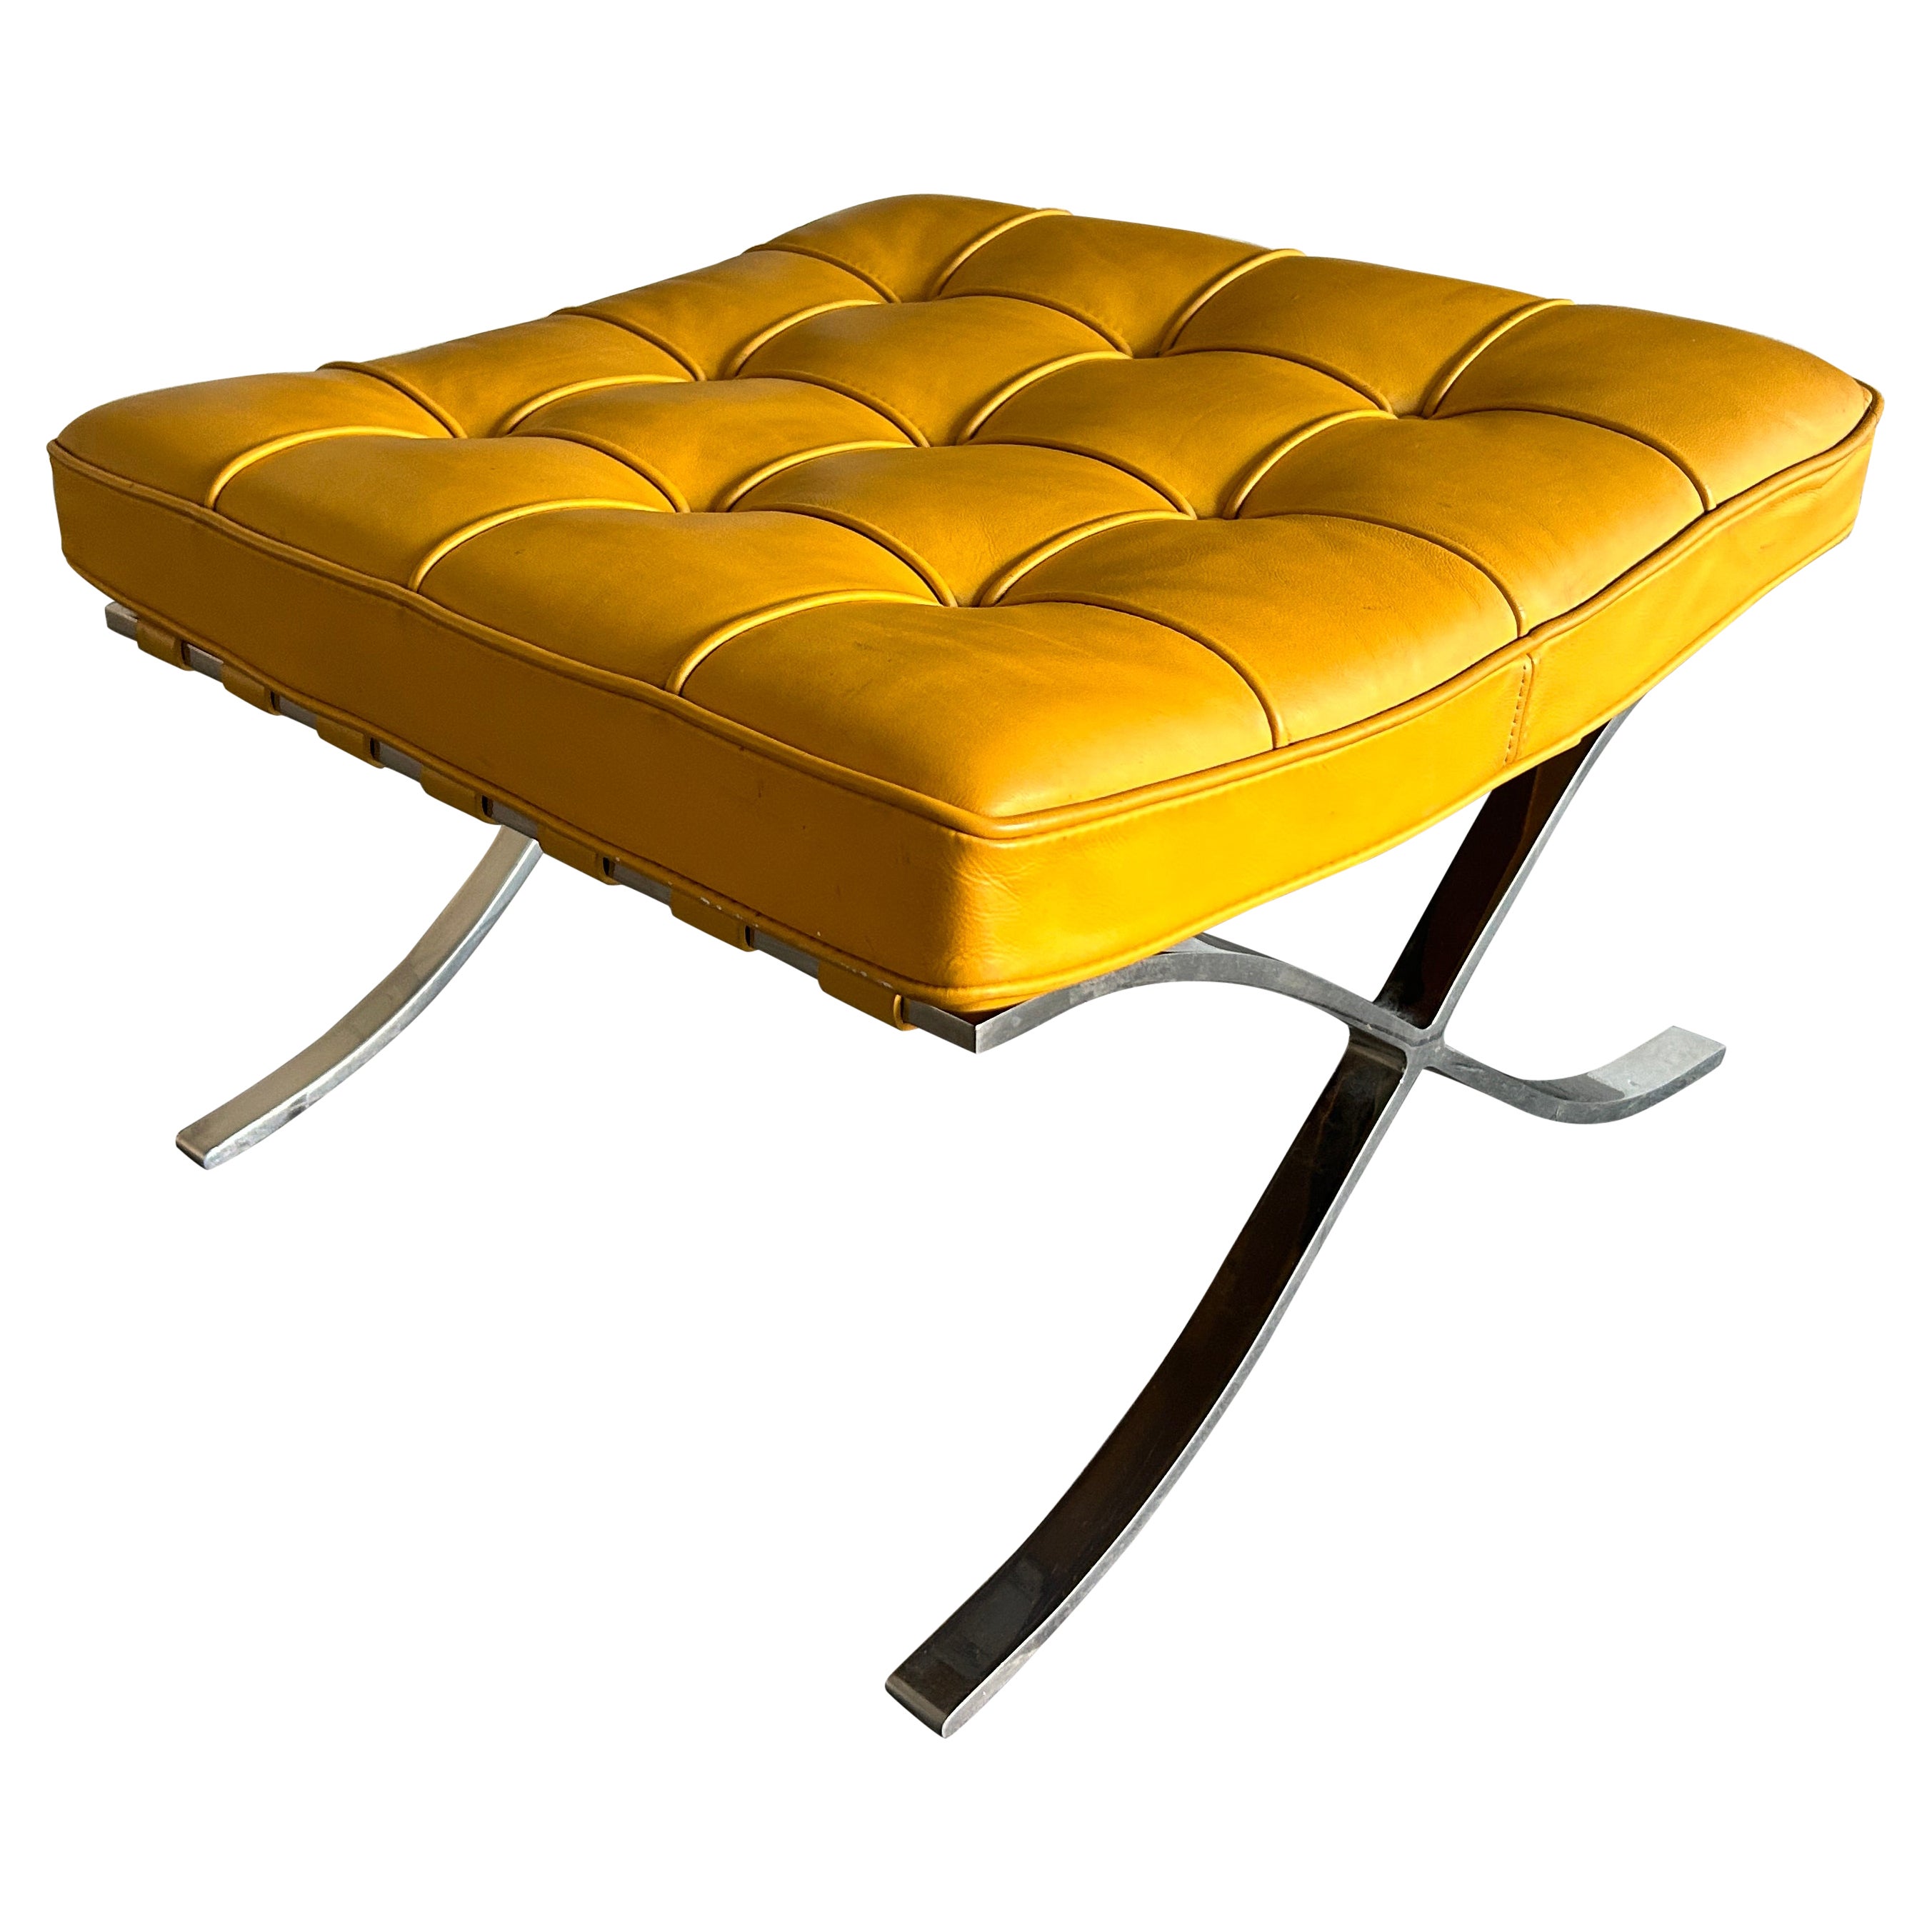 Midcentury Barcelona Ottoman Stool in bright yellow Leather for Knoll